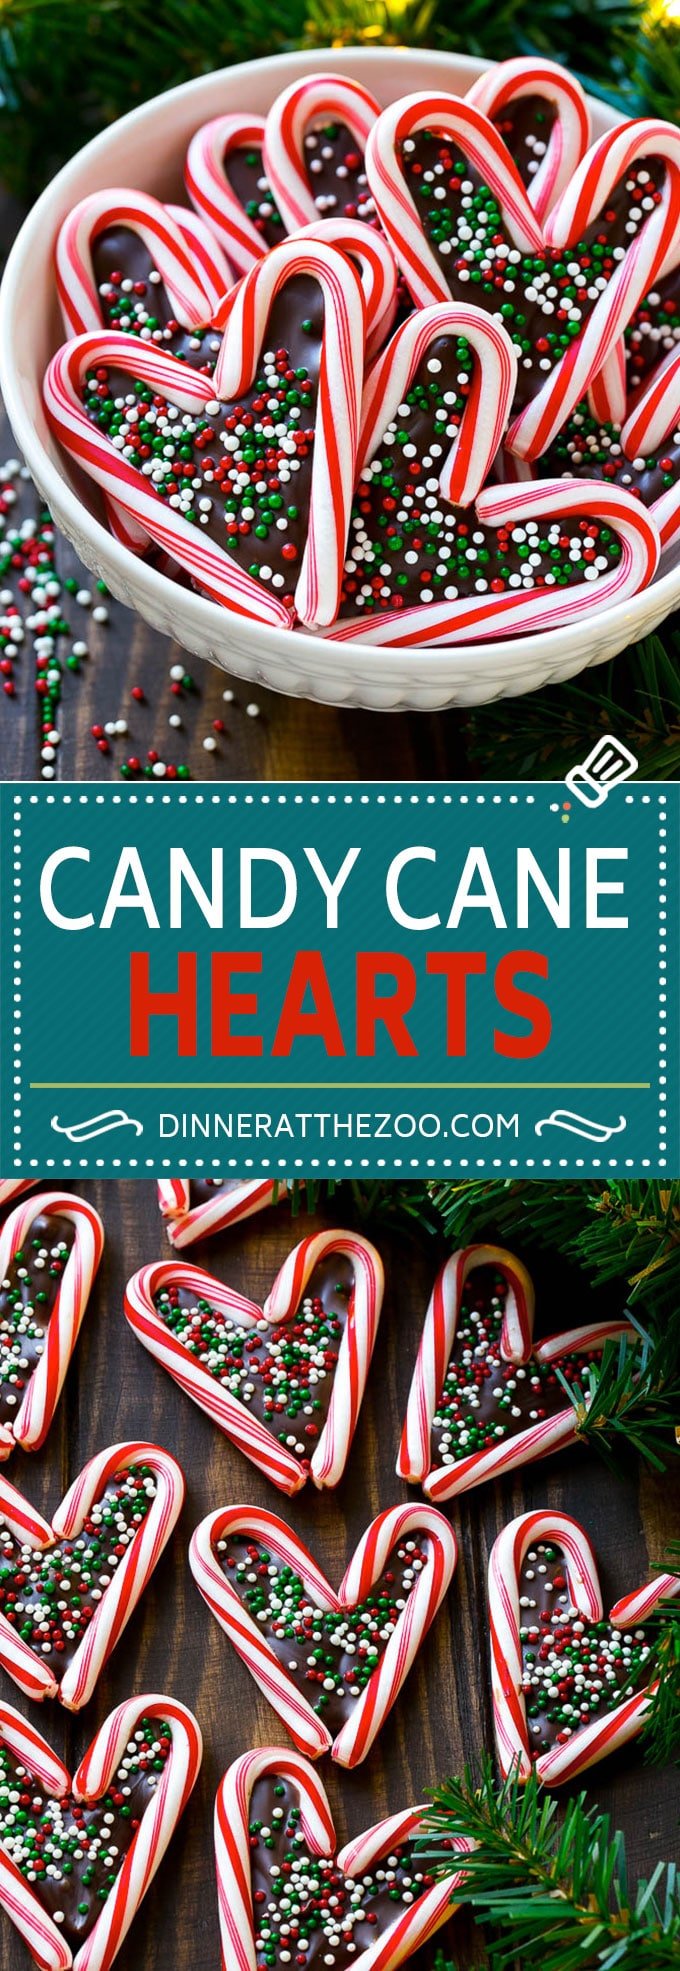 Candy Cane Hearts Recipe | Candy Cane Desserts | Candy Cane Treats | Christmas Favors